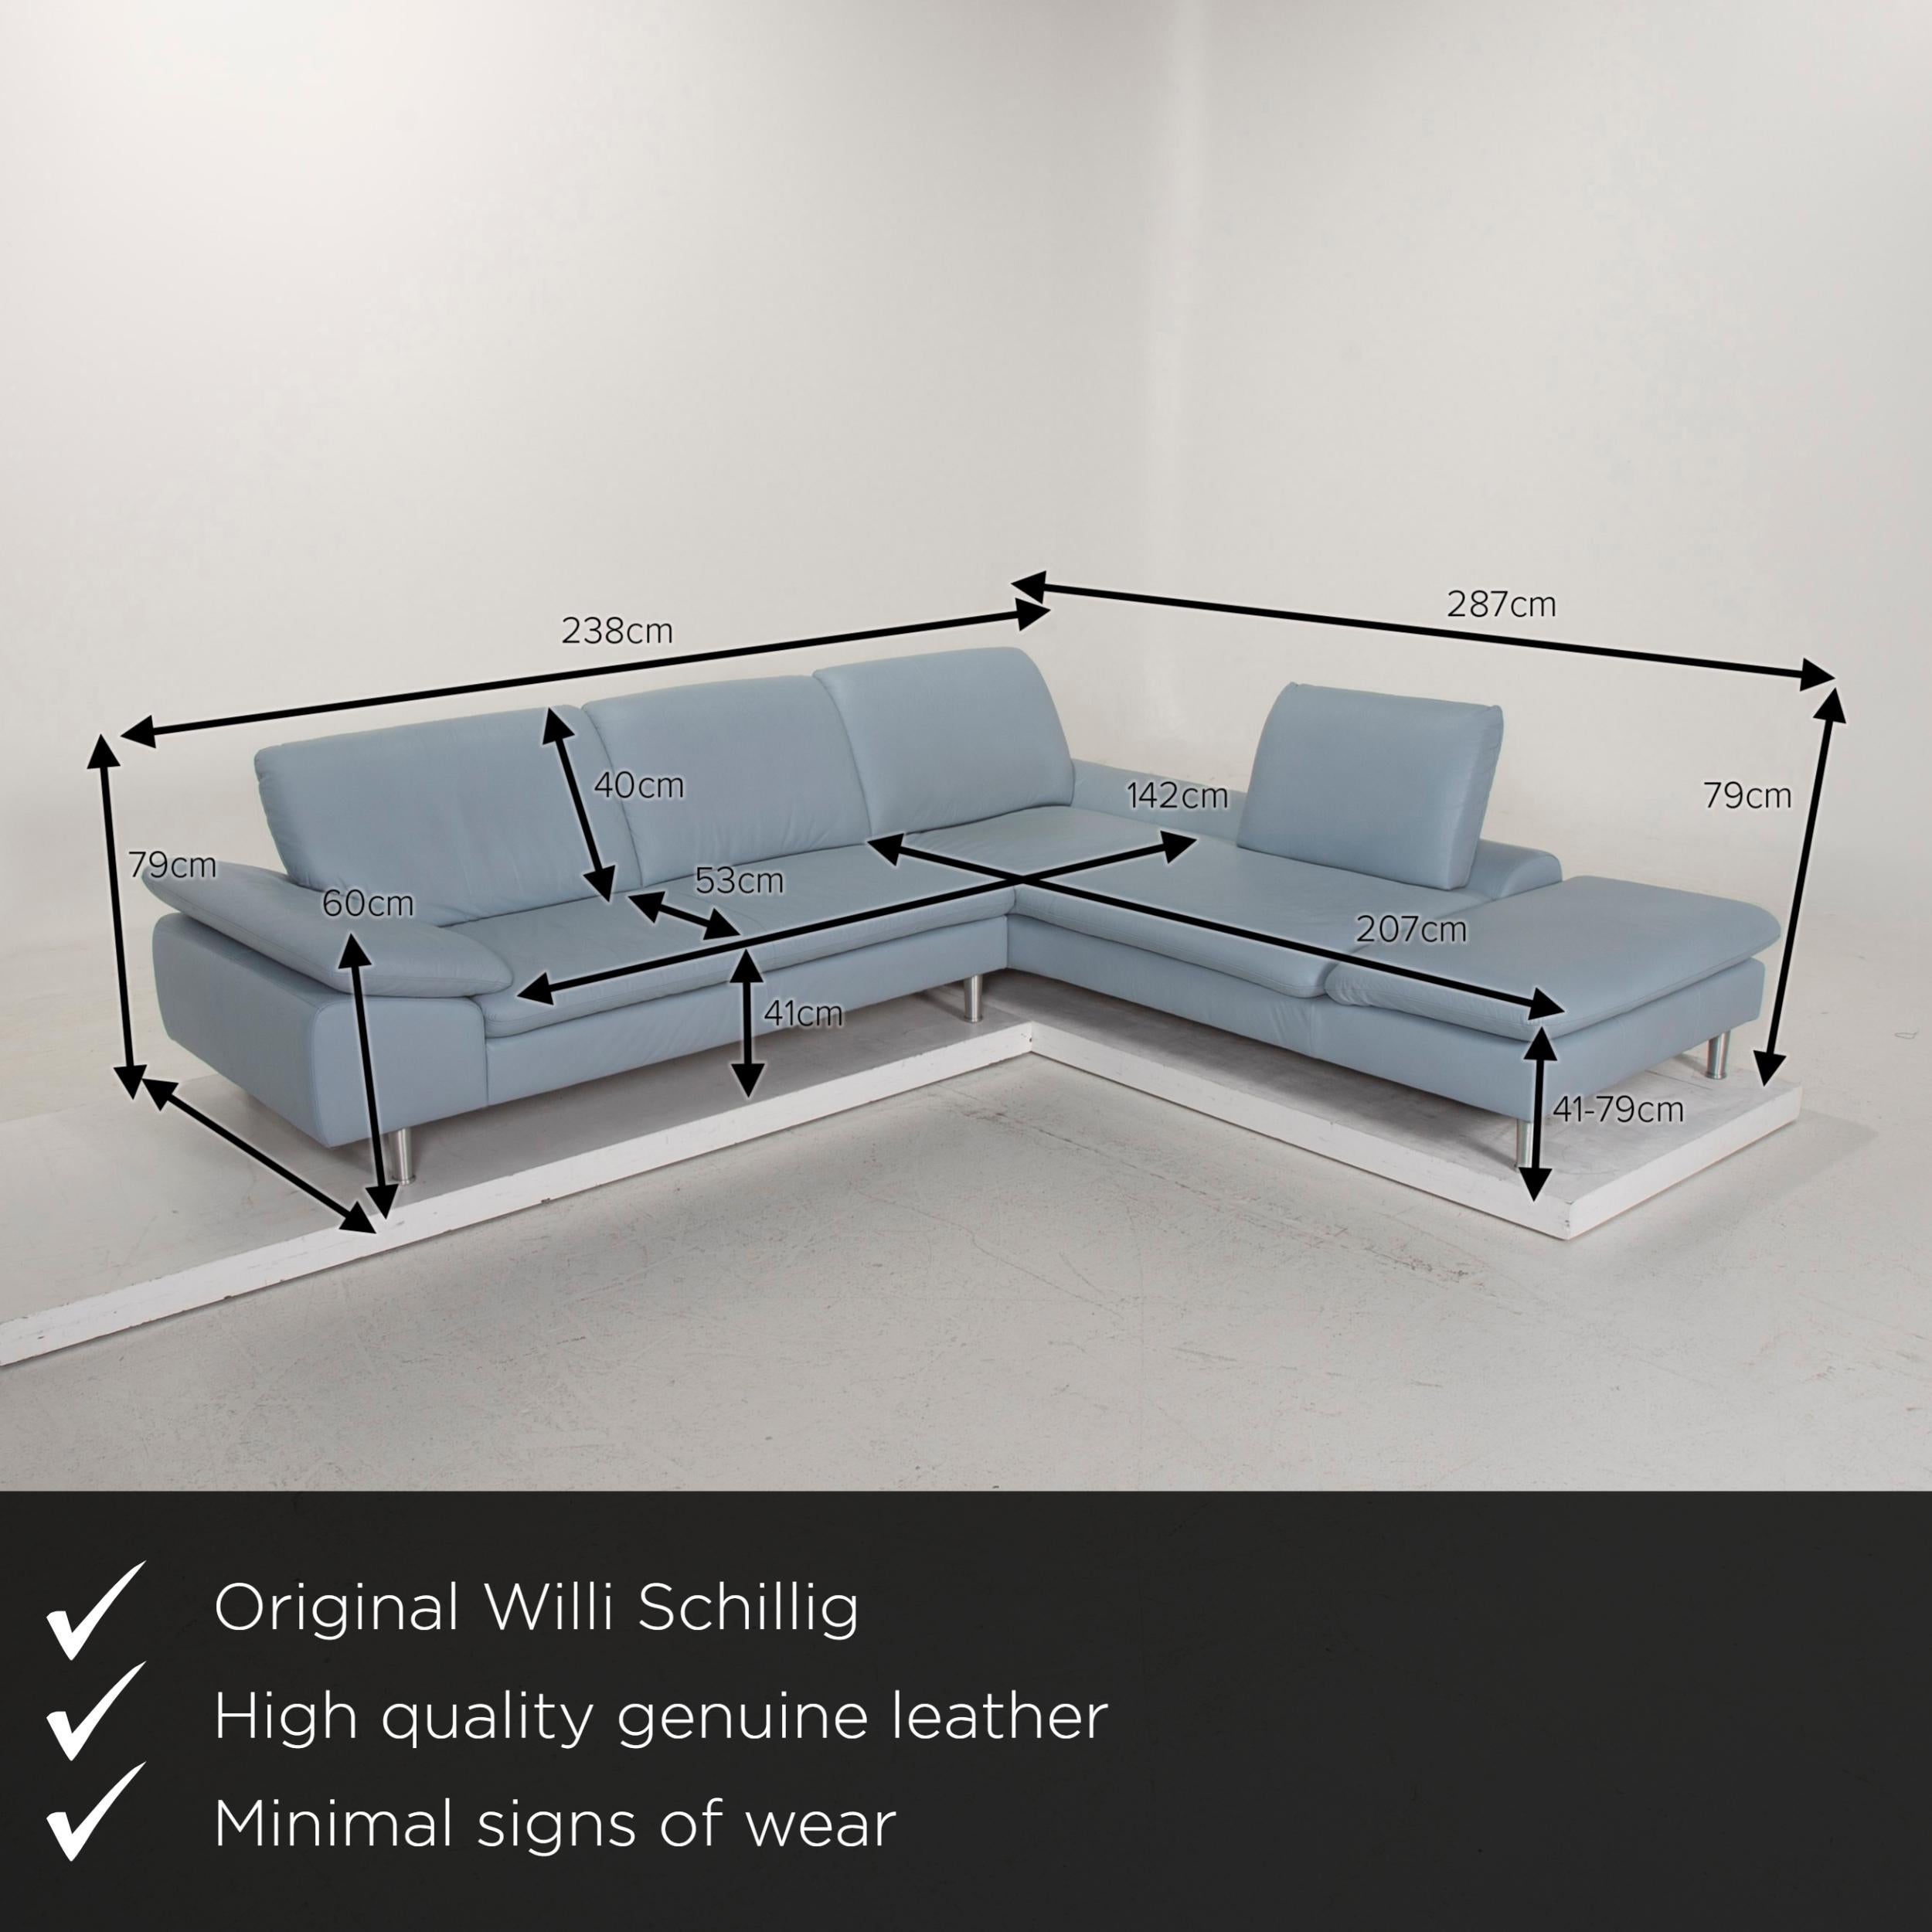 We present to you a Willi Schillig Loop leather sofa ice blue corner sofa blue function couch.


 Product measurements in centimeters:
 

Depth 102
Width 238
Height 79
Seat height 41
Rest height 41
Seat depth 53
Seat width 207
Back